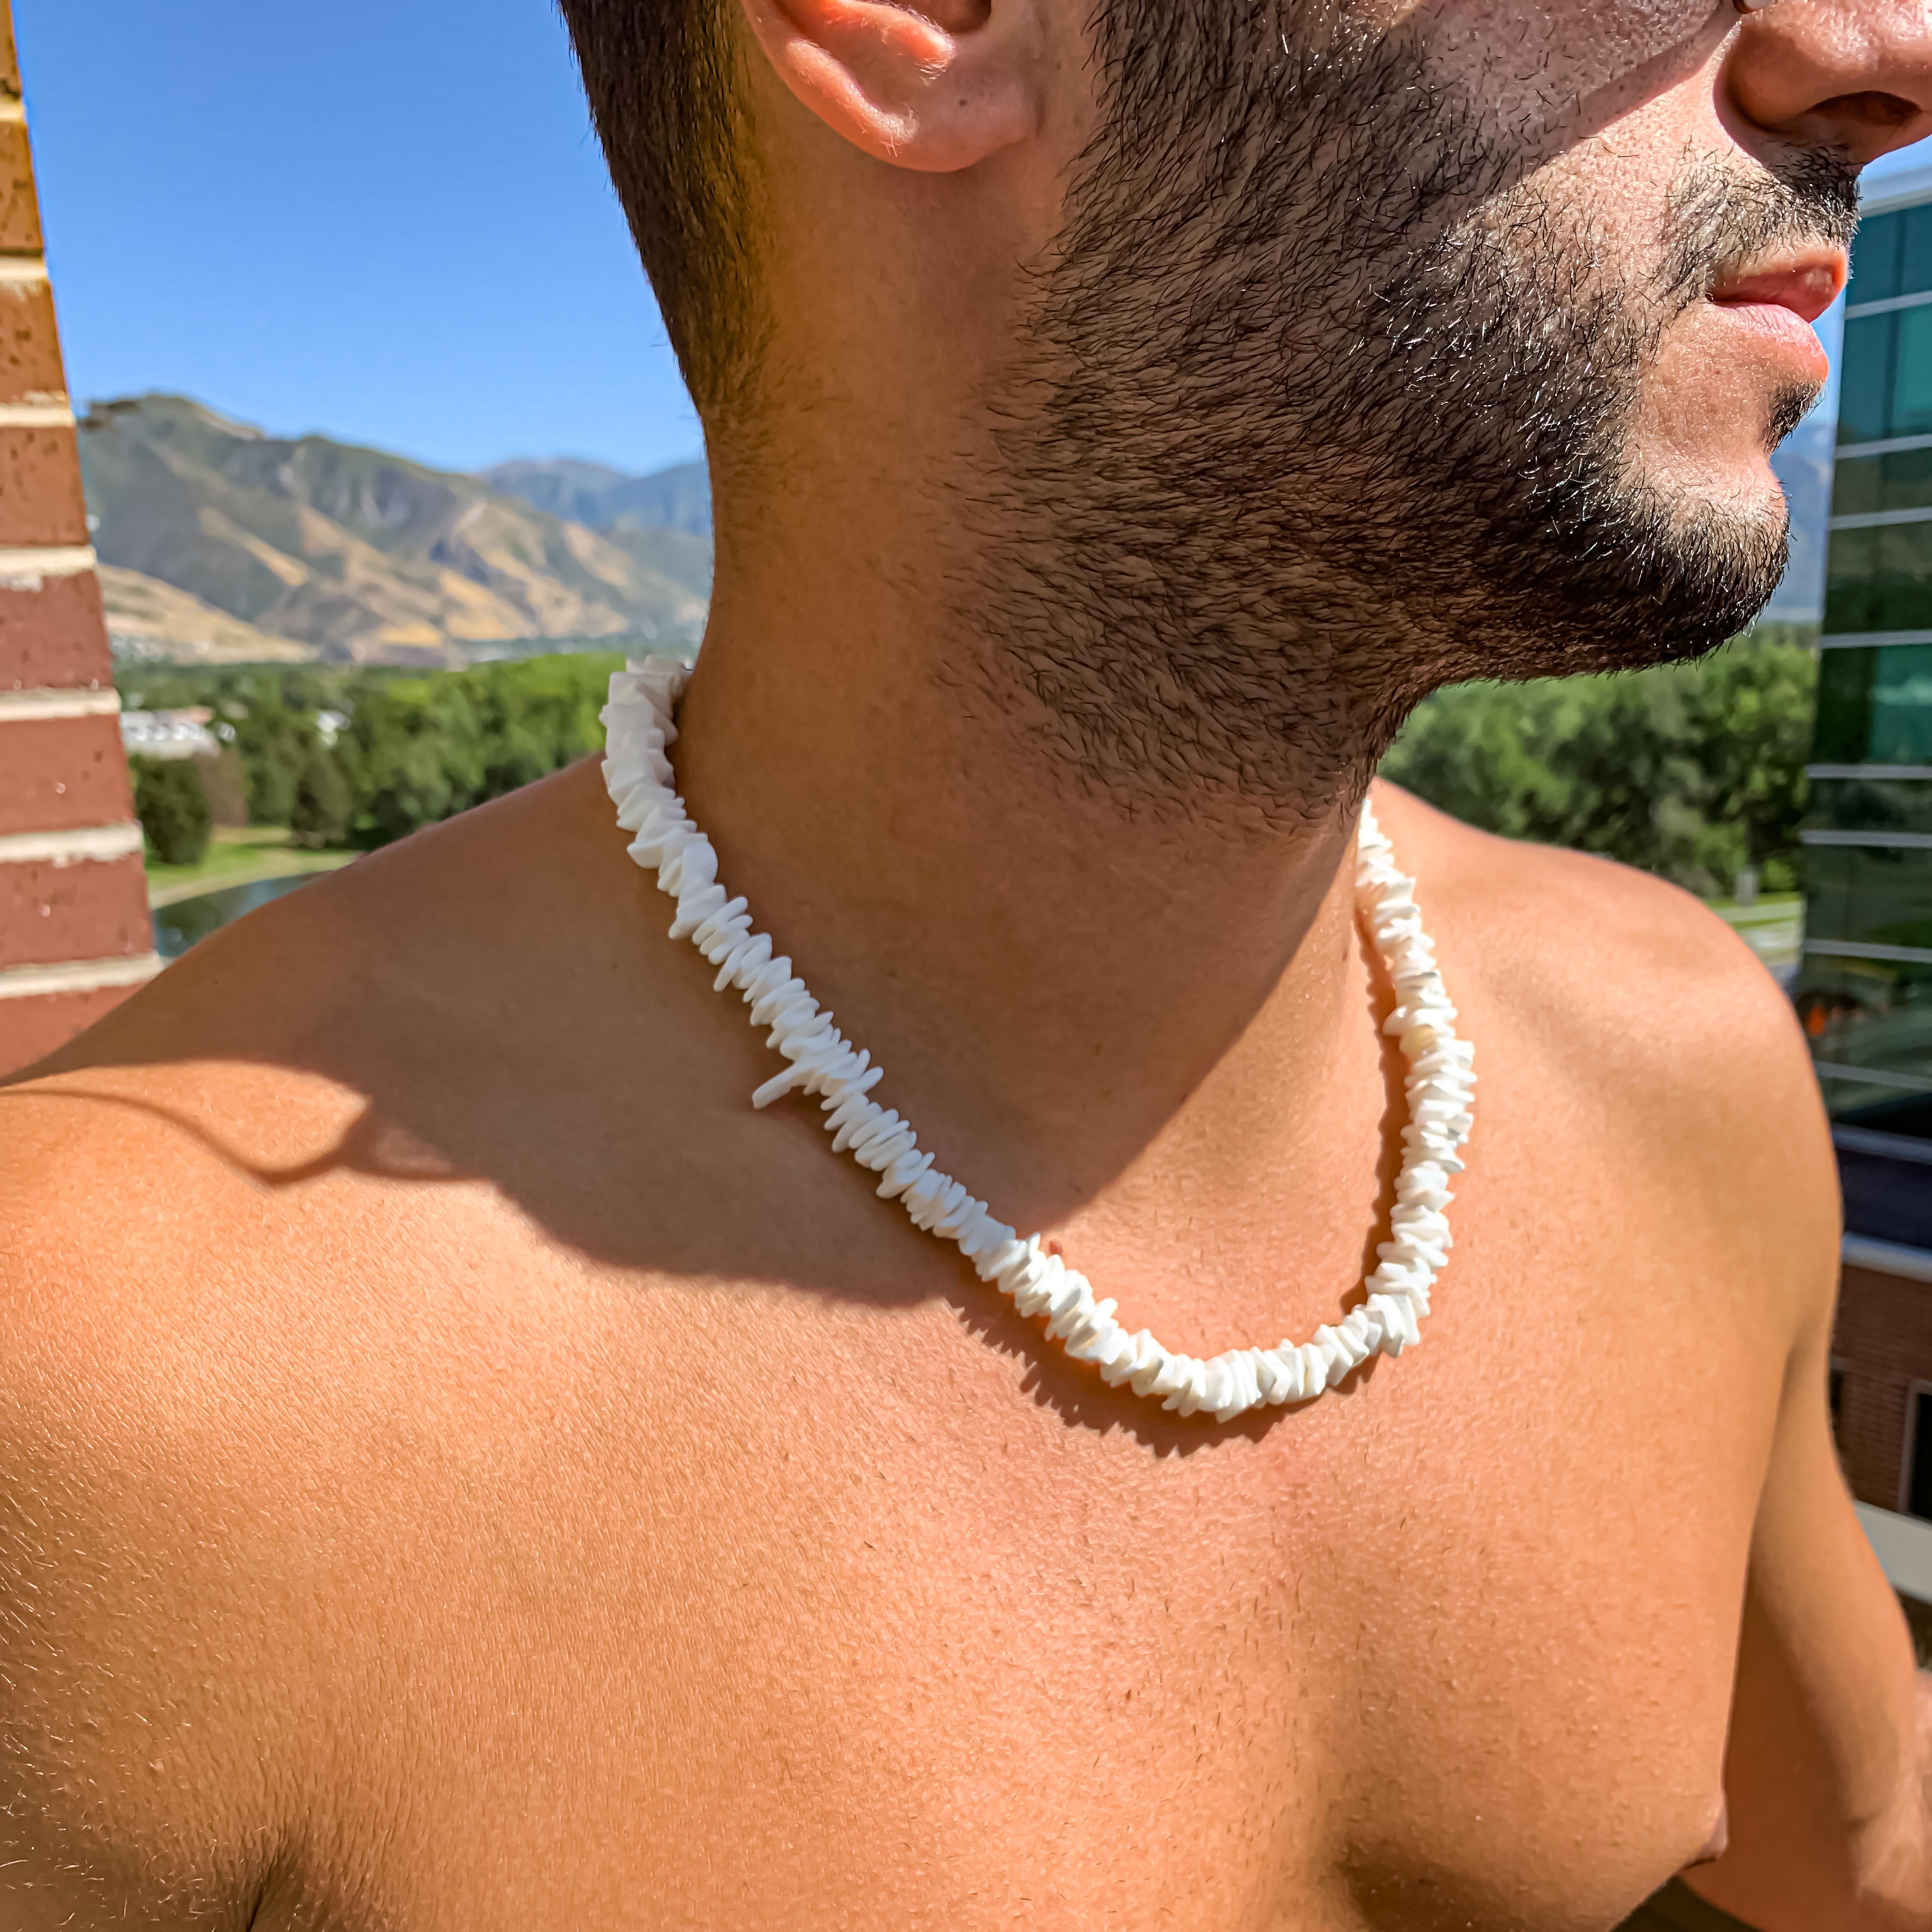 Surfer Necklace Men's Tribal Jewelry Natural Coconut Shell Spacer Beads  Fashion | eBay